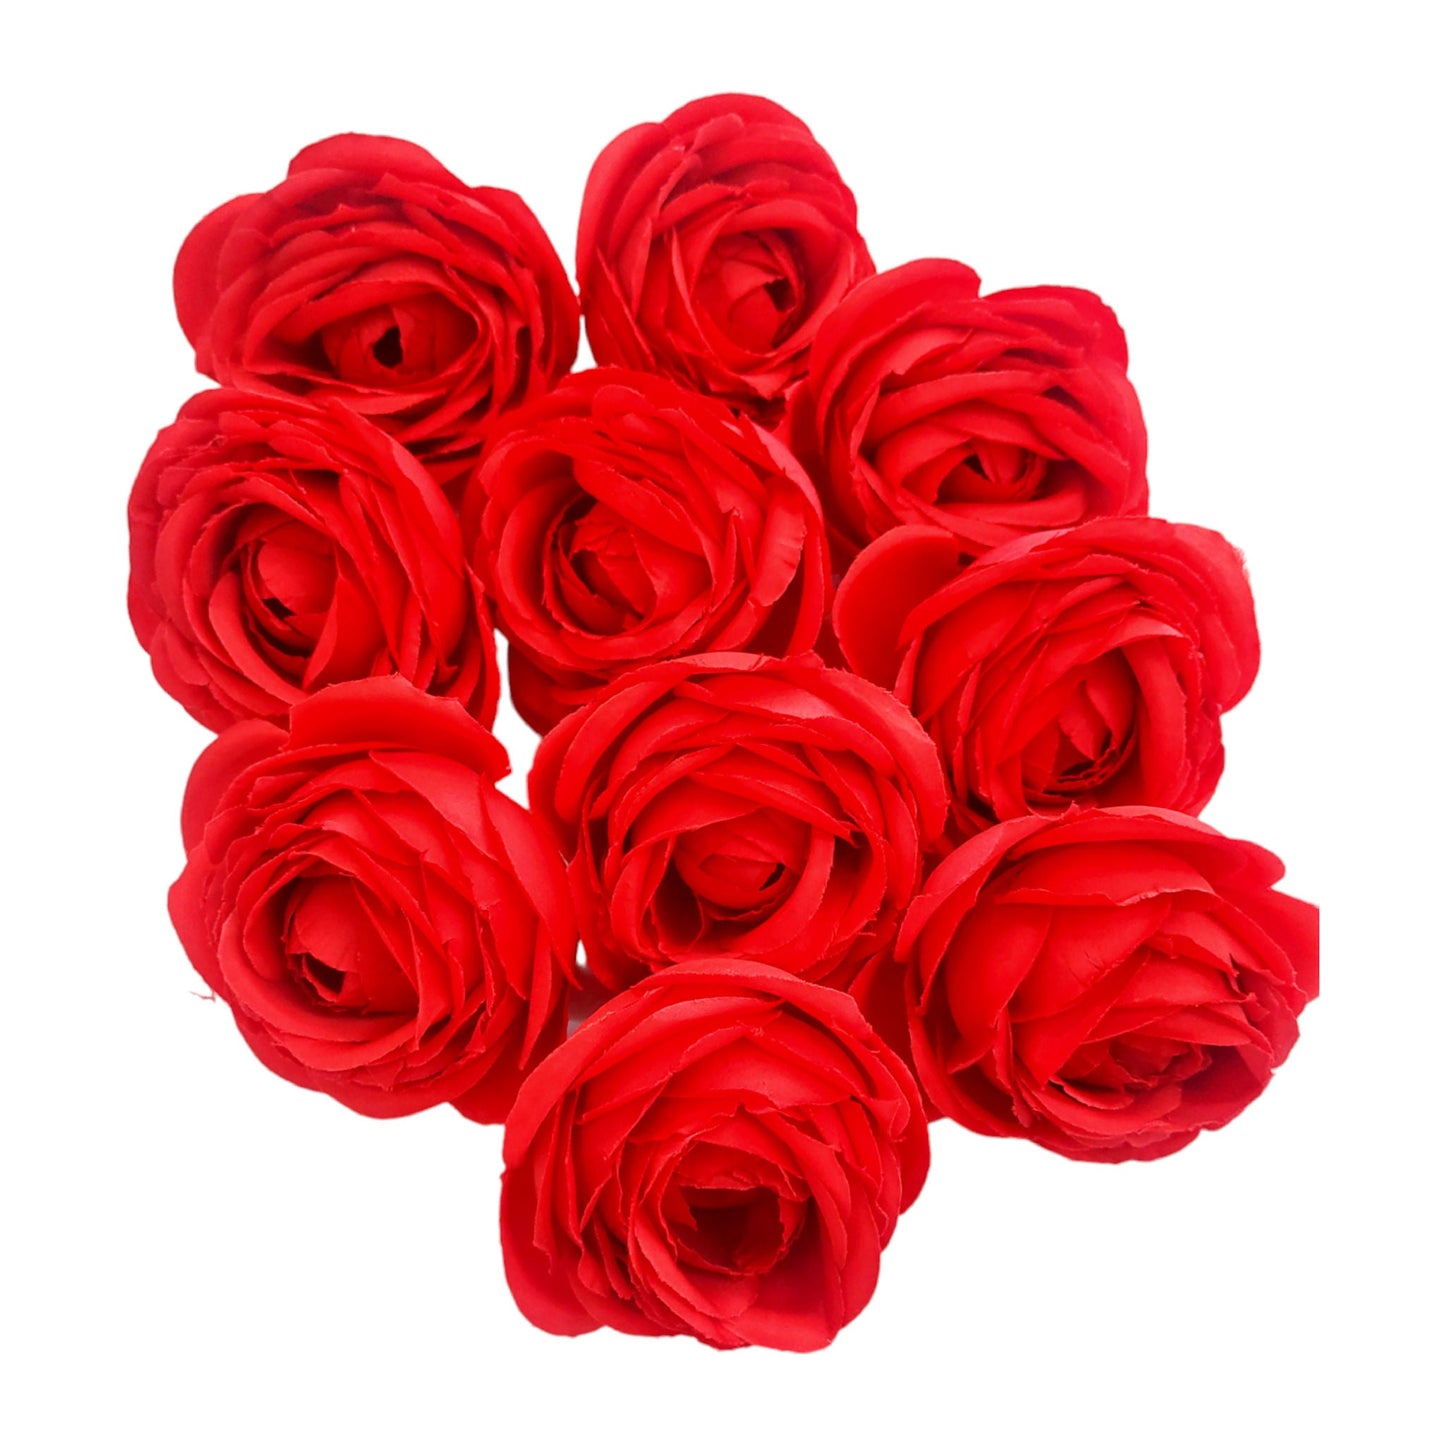 Indian Petals 6.5 cm Big Cabbage  Rose Fabric Flower Head For Crafting or Decoration - 20 Pcs, Red